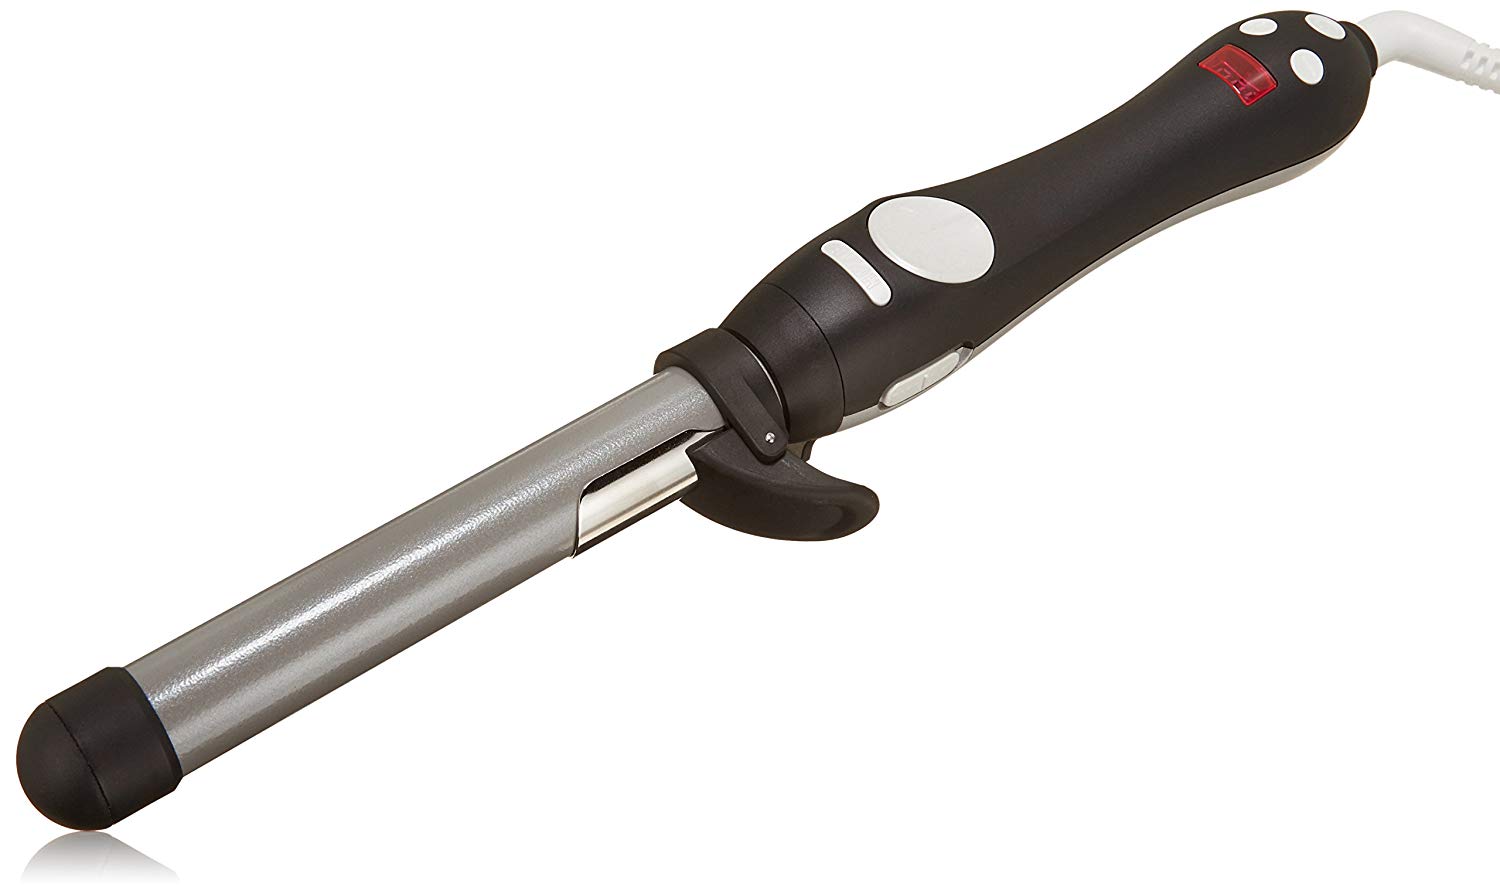 The Beachwaver Co. S1 Curling Iron